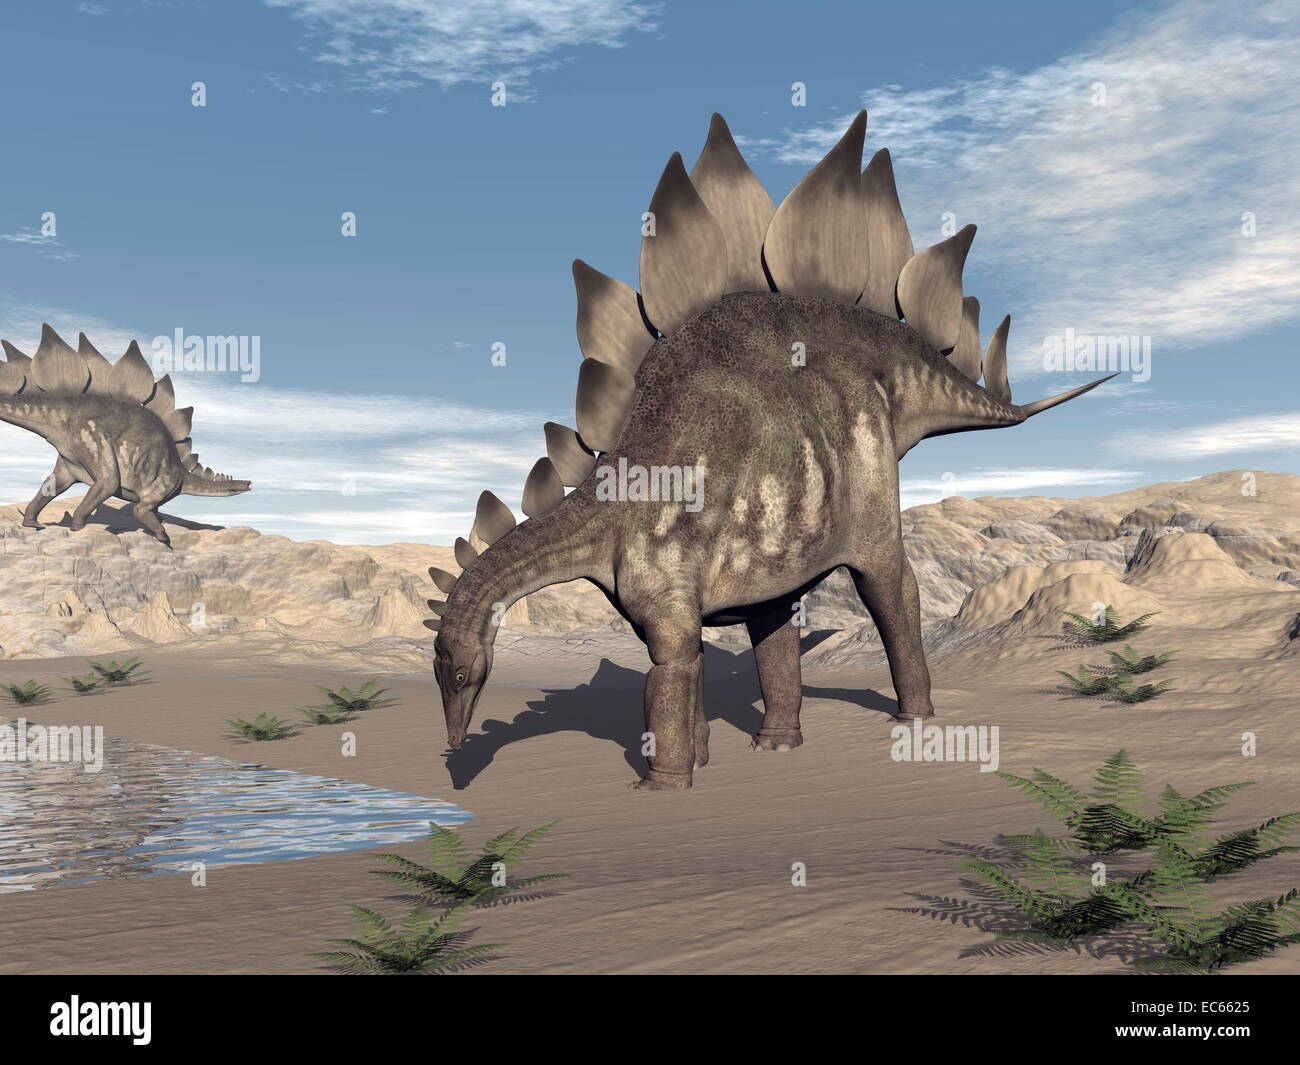 One stegosaurus walking to water and other standing on a hill in the desert by day Stock Photo